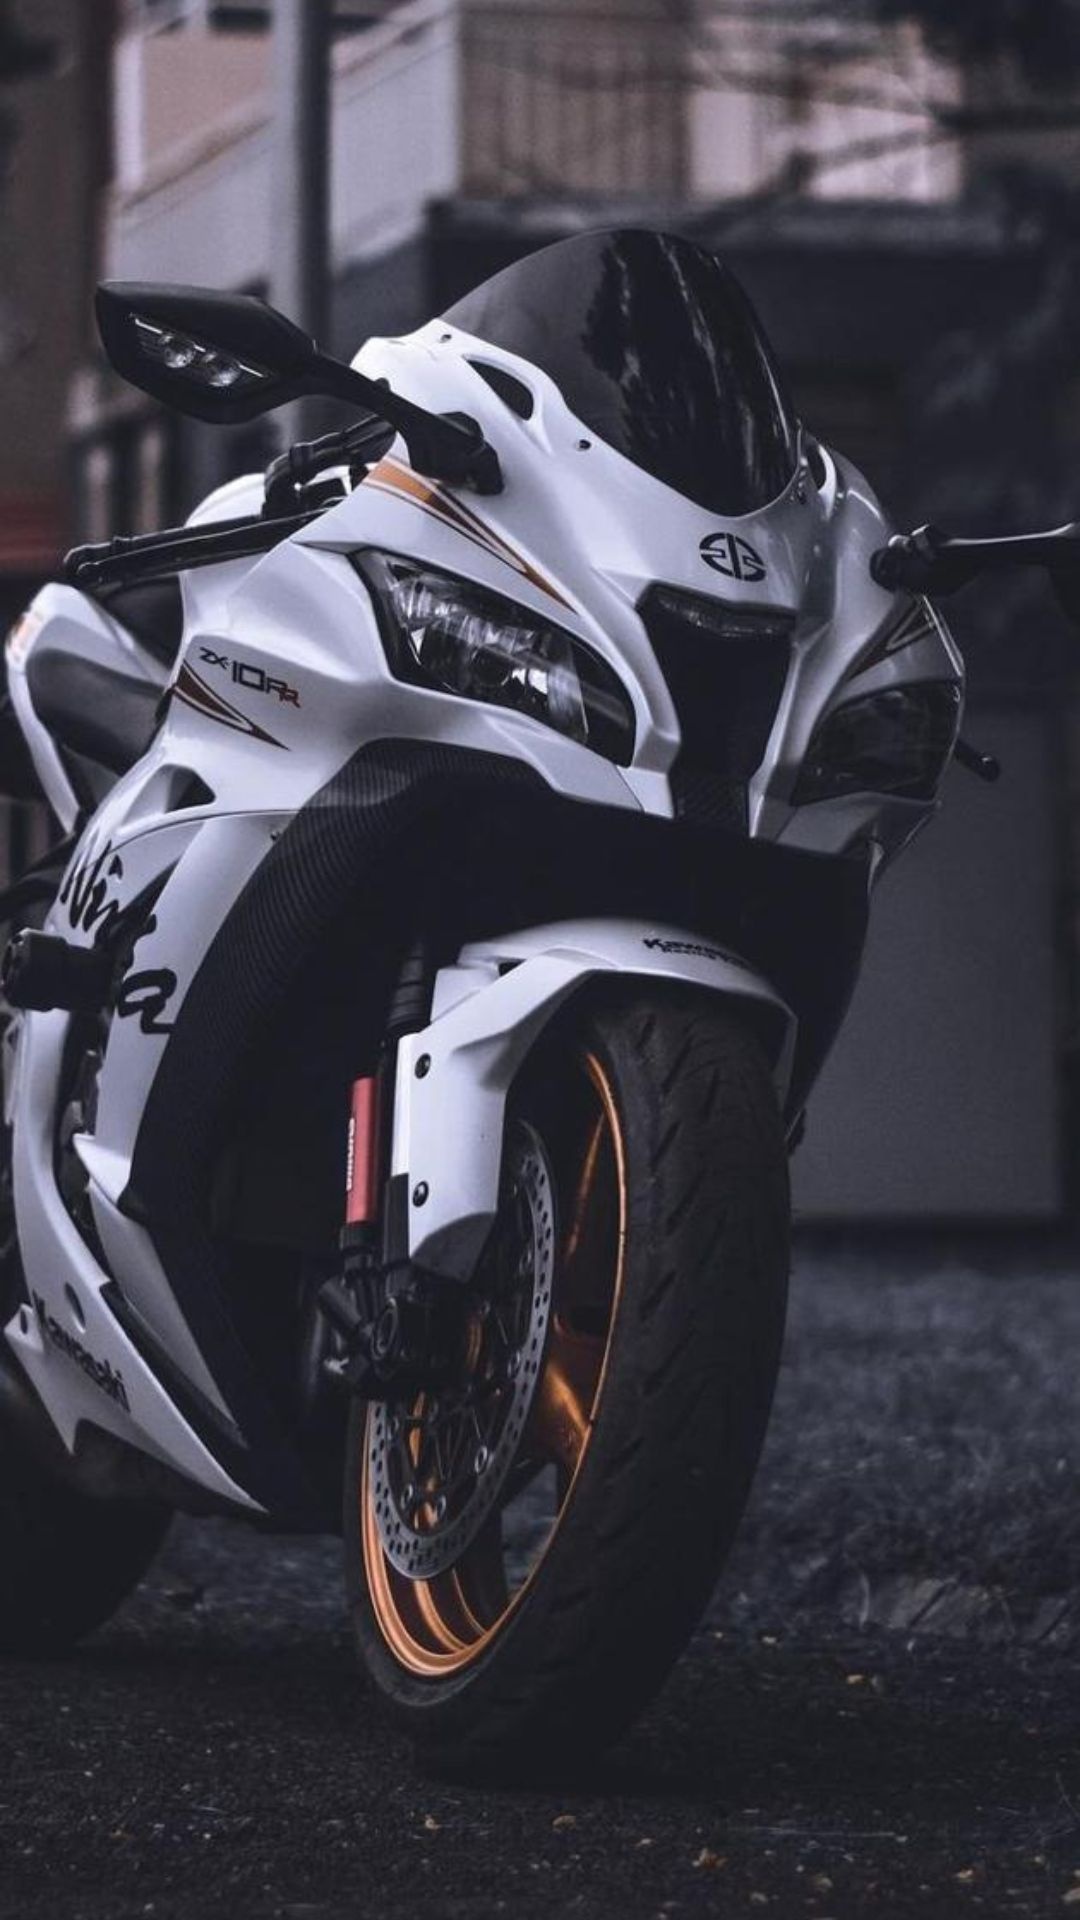 Superbike: White racing motorcycle, Street bike with an aggressive view, Two-wheeled transport. 1080x1920 Full HD Background.